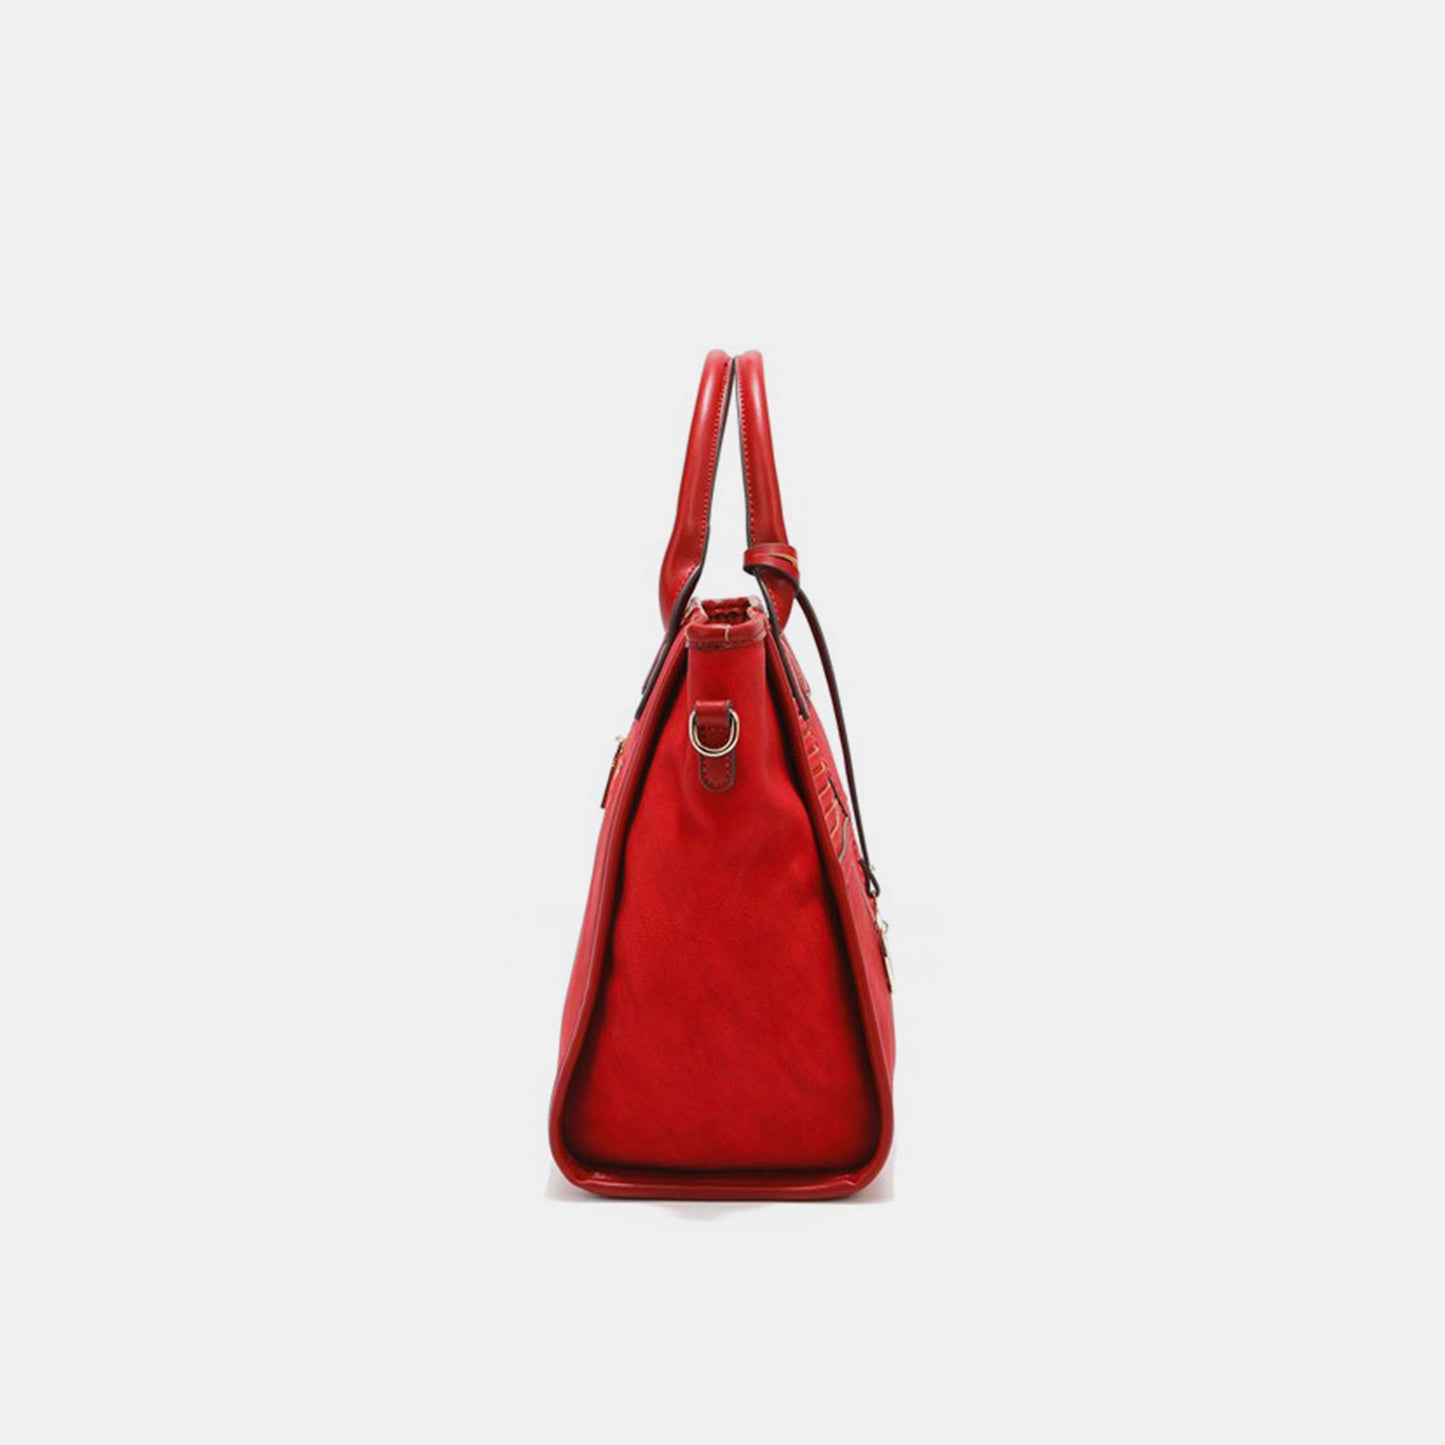 Side profile of an elegant accessory: the Nicole Lee USA Scallop Stitched Handbag, available at Marianela's Exclusive Shop, LLC. This red handbag boasts a sleek, structured design with twin handles and features scallop stitching along with silver-toned hardware, including a ring attachment detail on the side. The image is set against a plain white background.